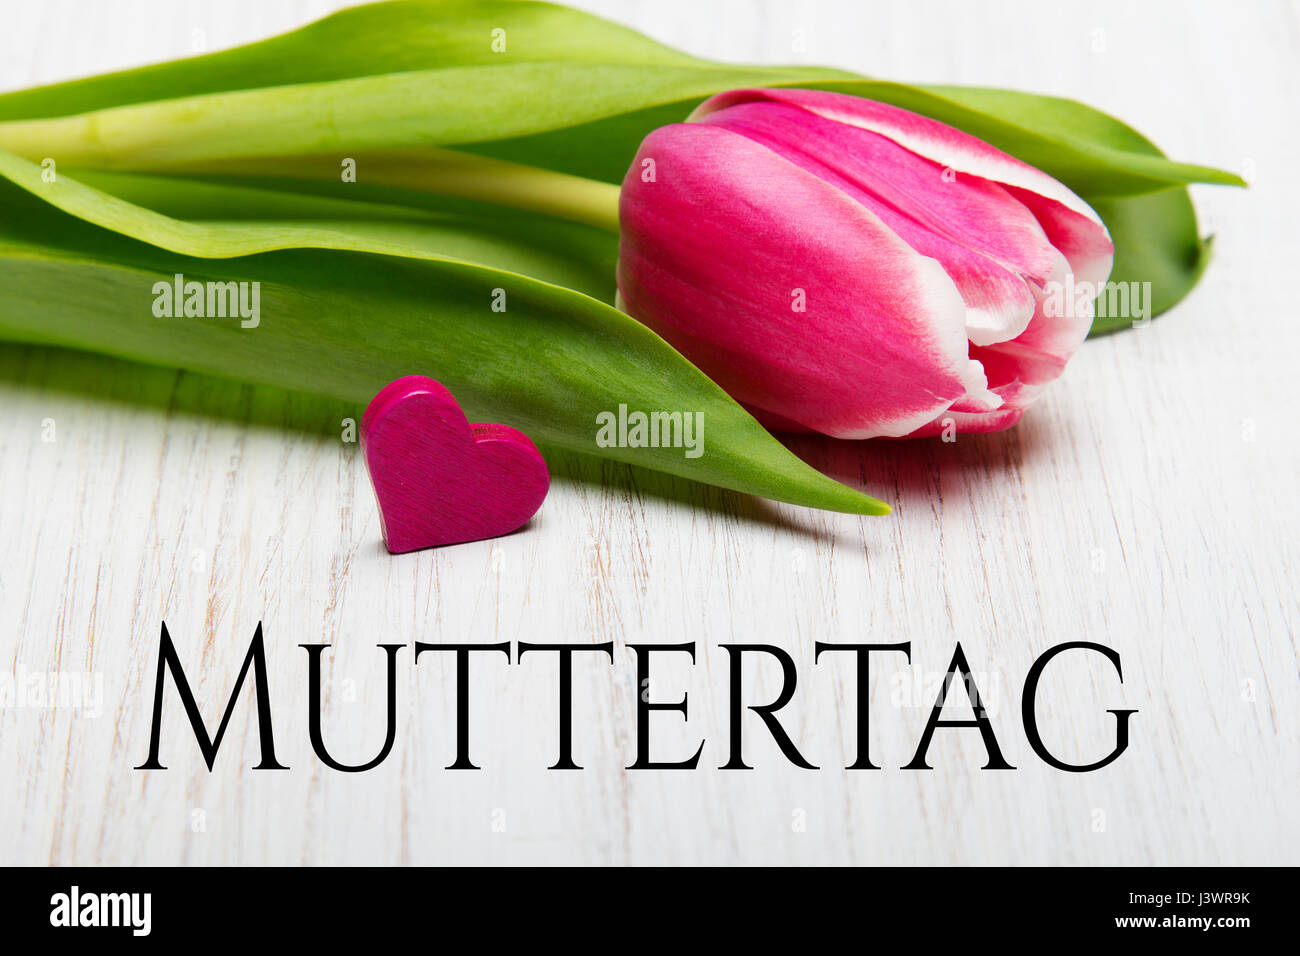 German Mother S Day Card With Word Muttertag Mother S Day Tulip And Stock Photo Alamy